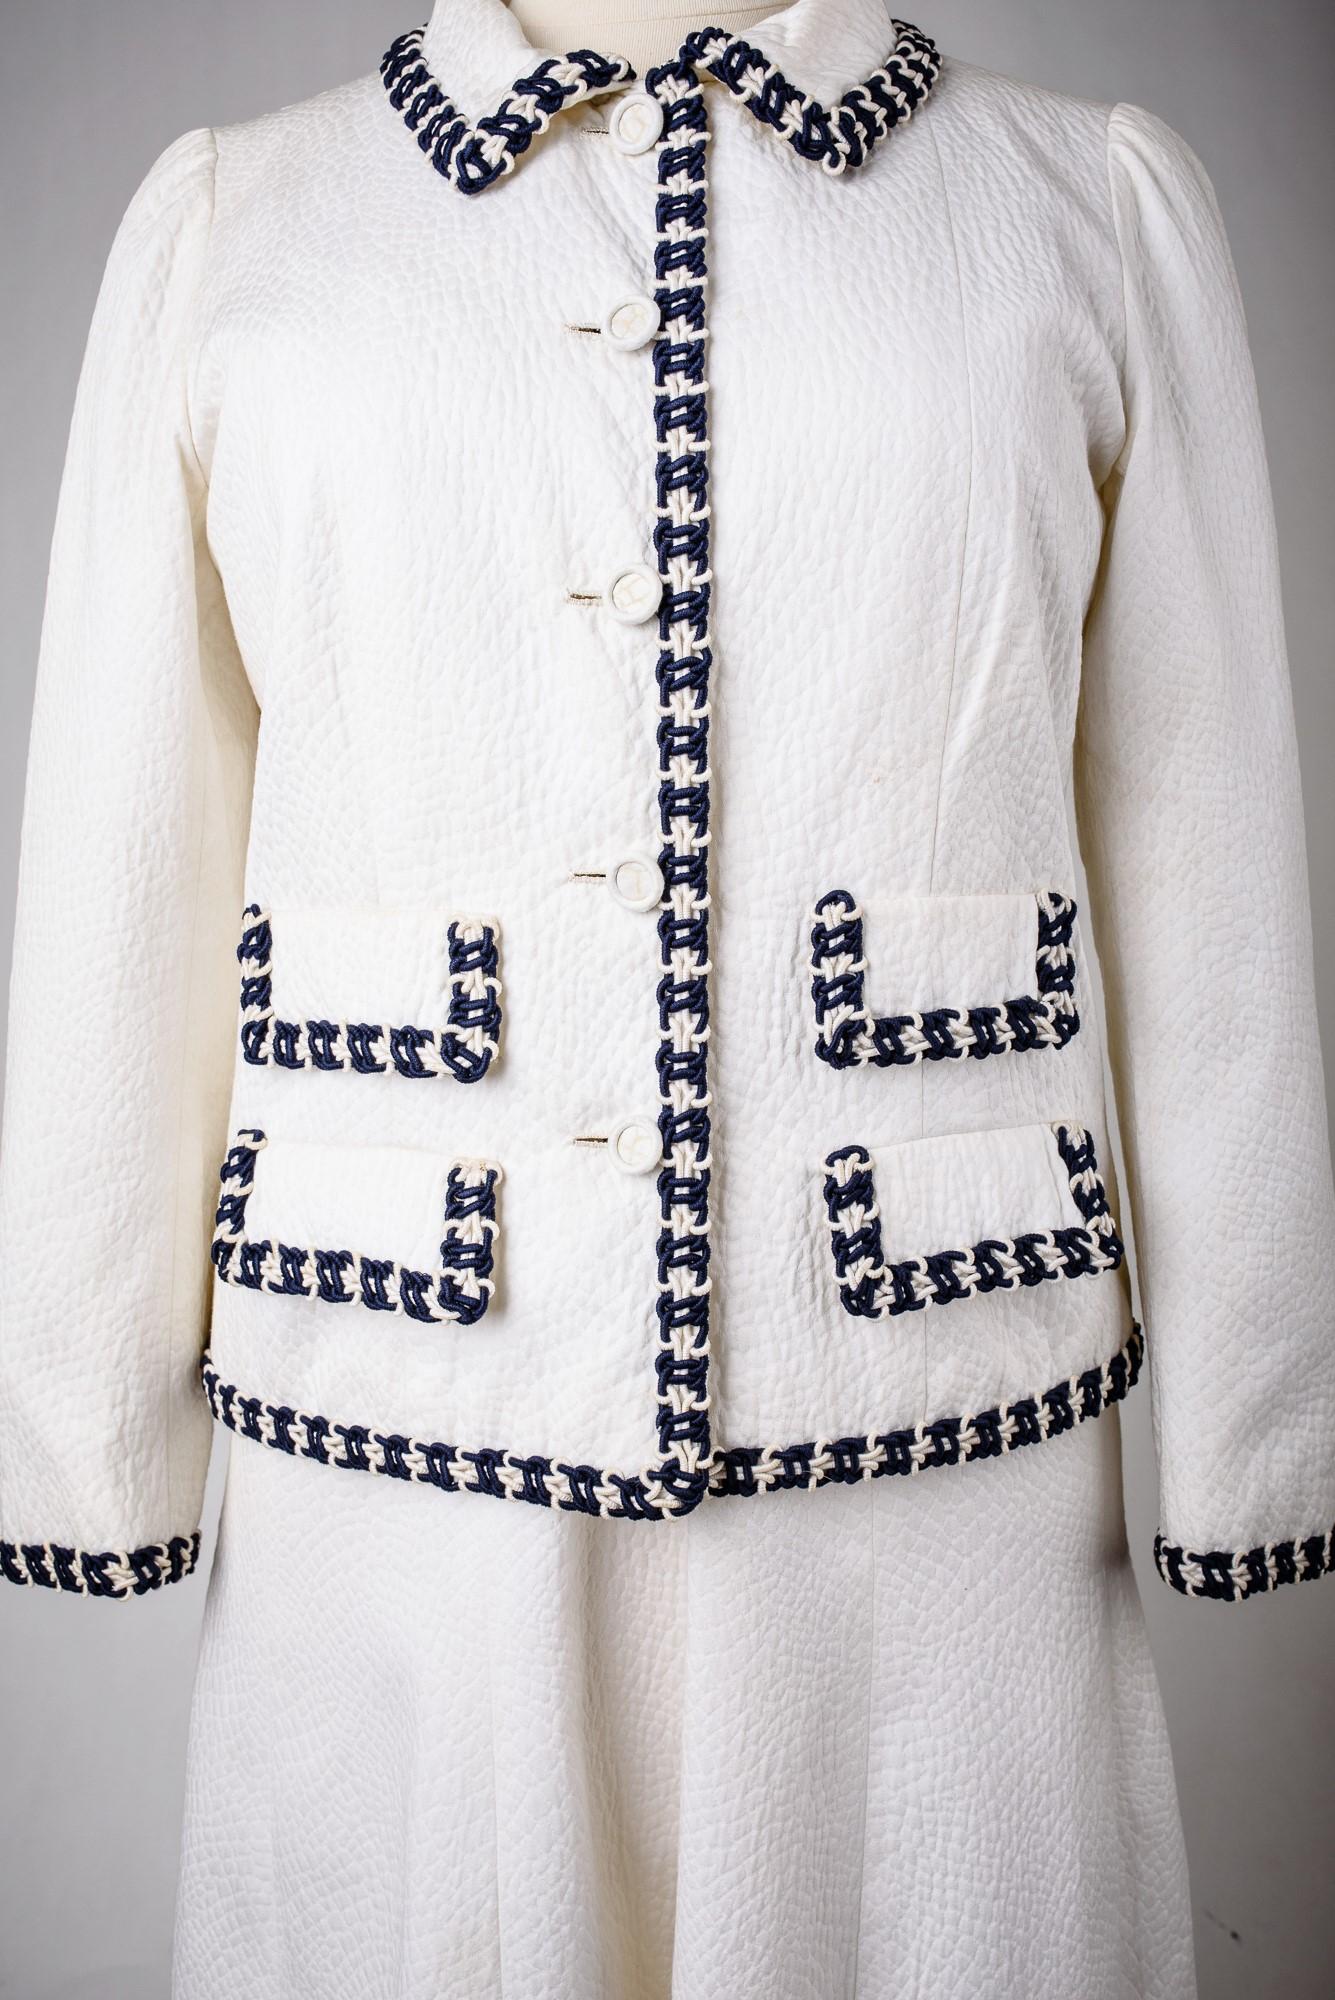 Circa 1970

France

Interesting historical model. Chanel Haute Couture white cotton piqué dress and suit effect jacket numbered 59989 and 59990 and dating from the early 1970s (probably from the time of Mademoiselle!). Sleeveless, V-neckline